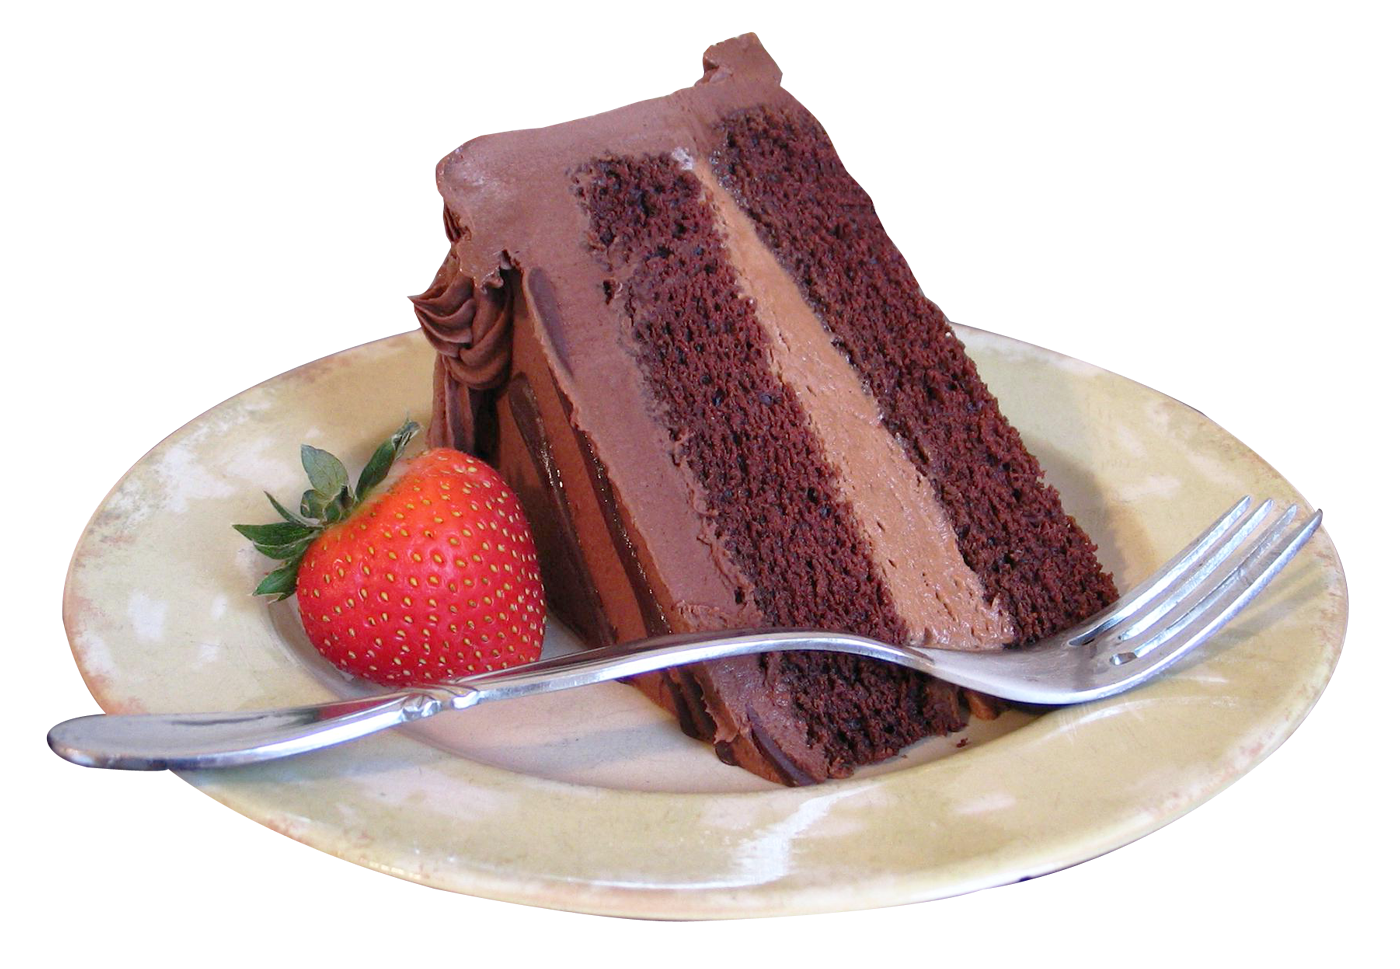 Download Cake PNG Image for Free